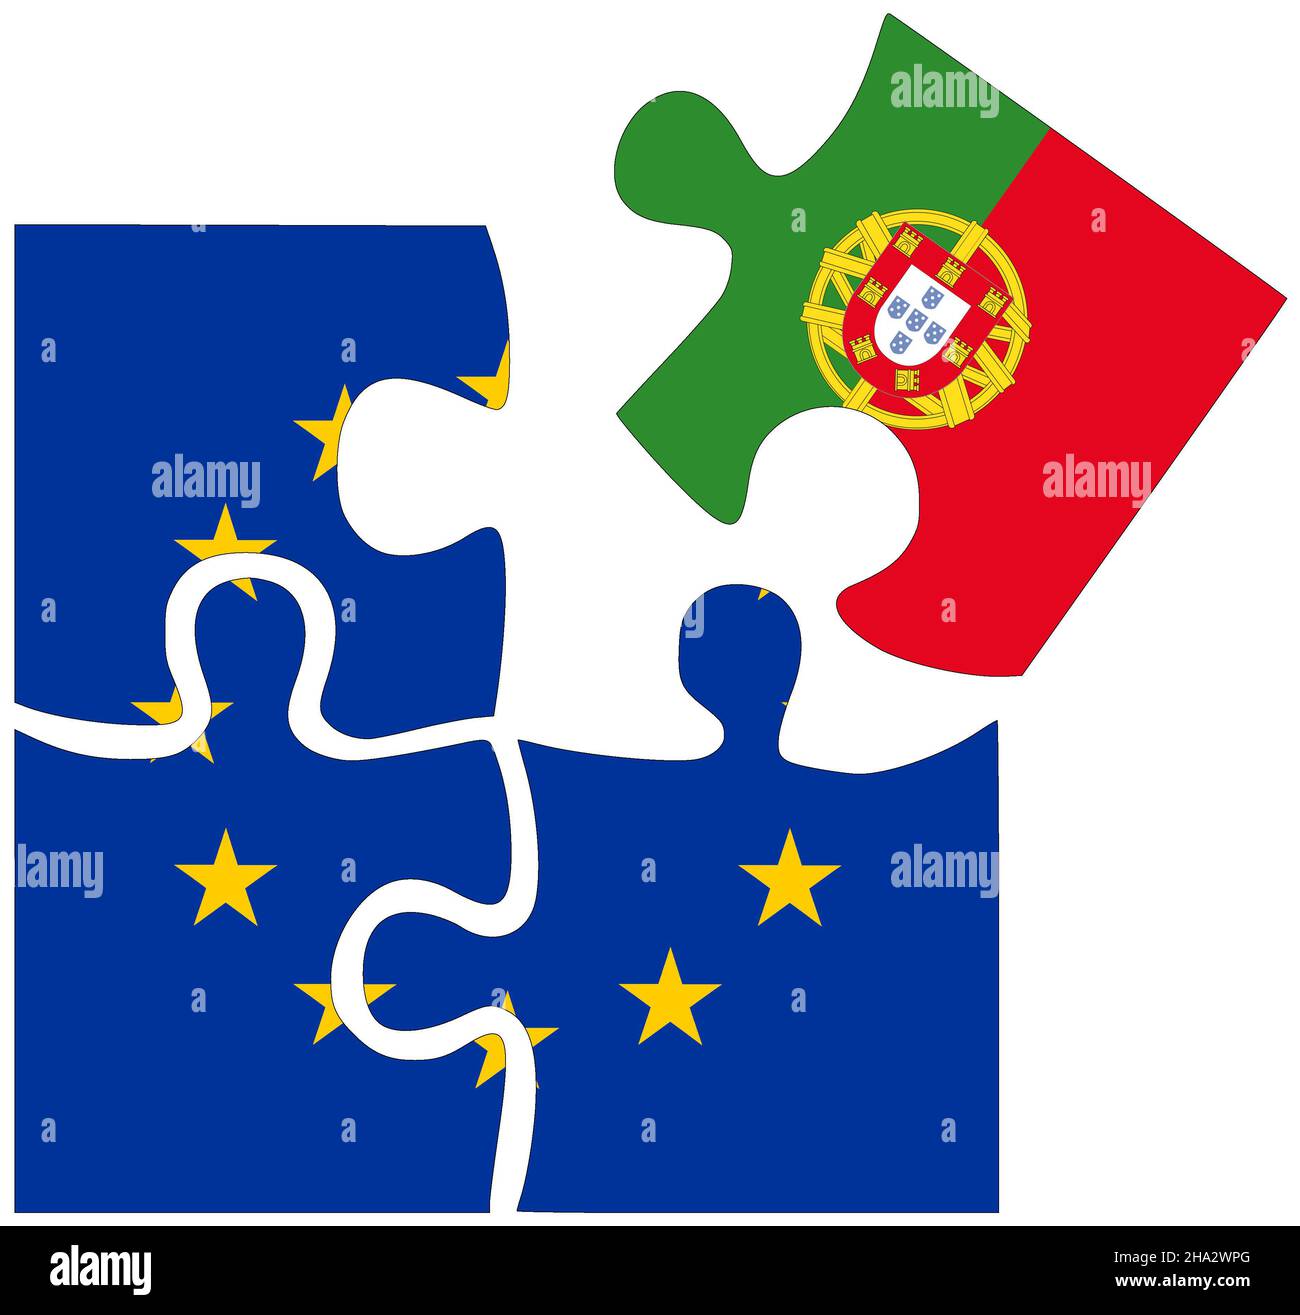 EU - Portugal : puzzle shapes with flags, symbol of agreement or friendship Stock Photo